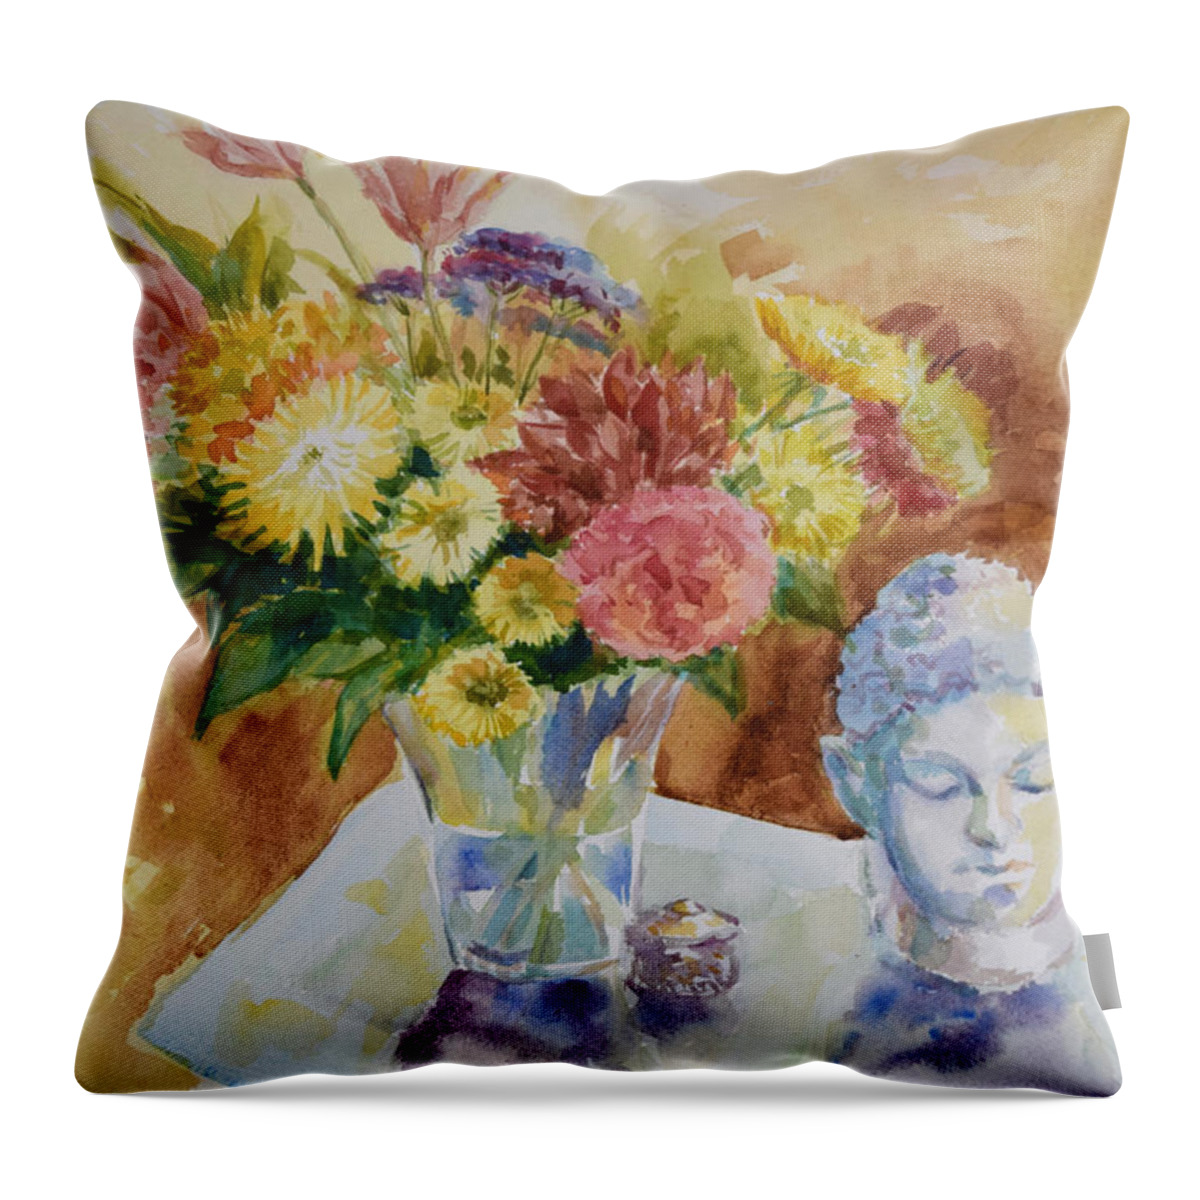 Still Life Throw Pillow featuring the painting Flower Vase with Buddha by Jyotika Shroff